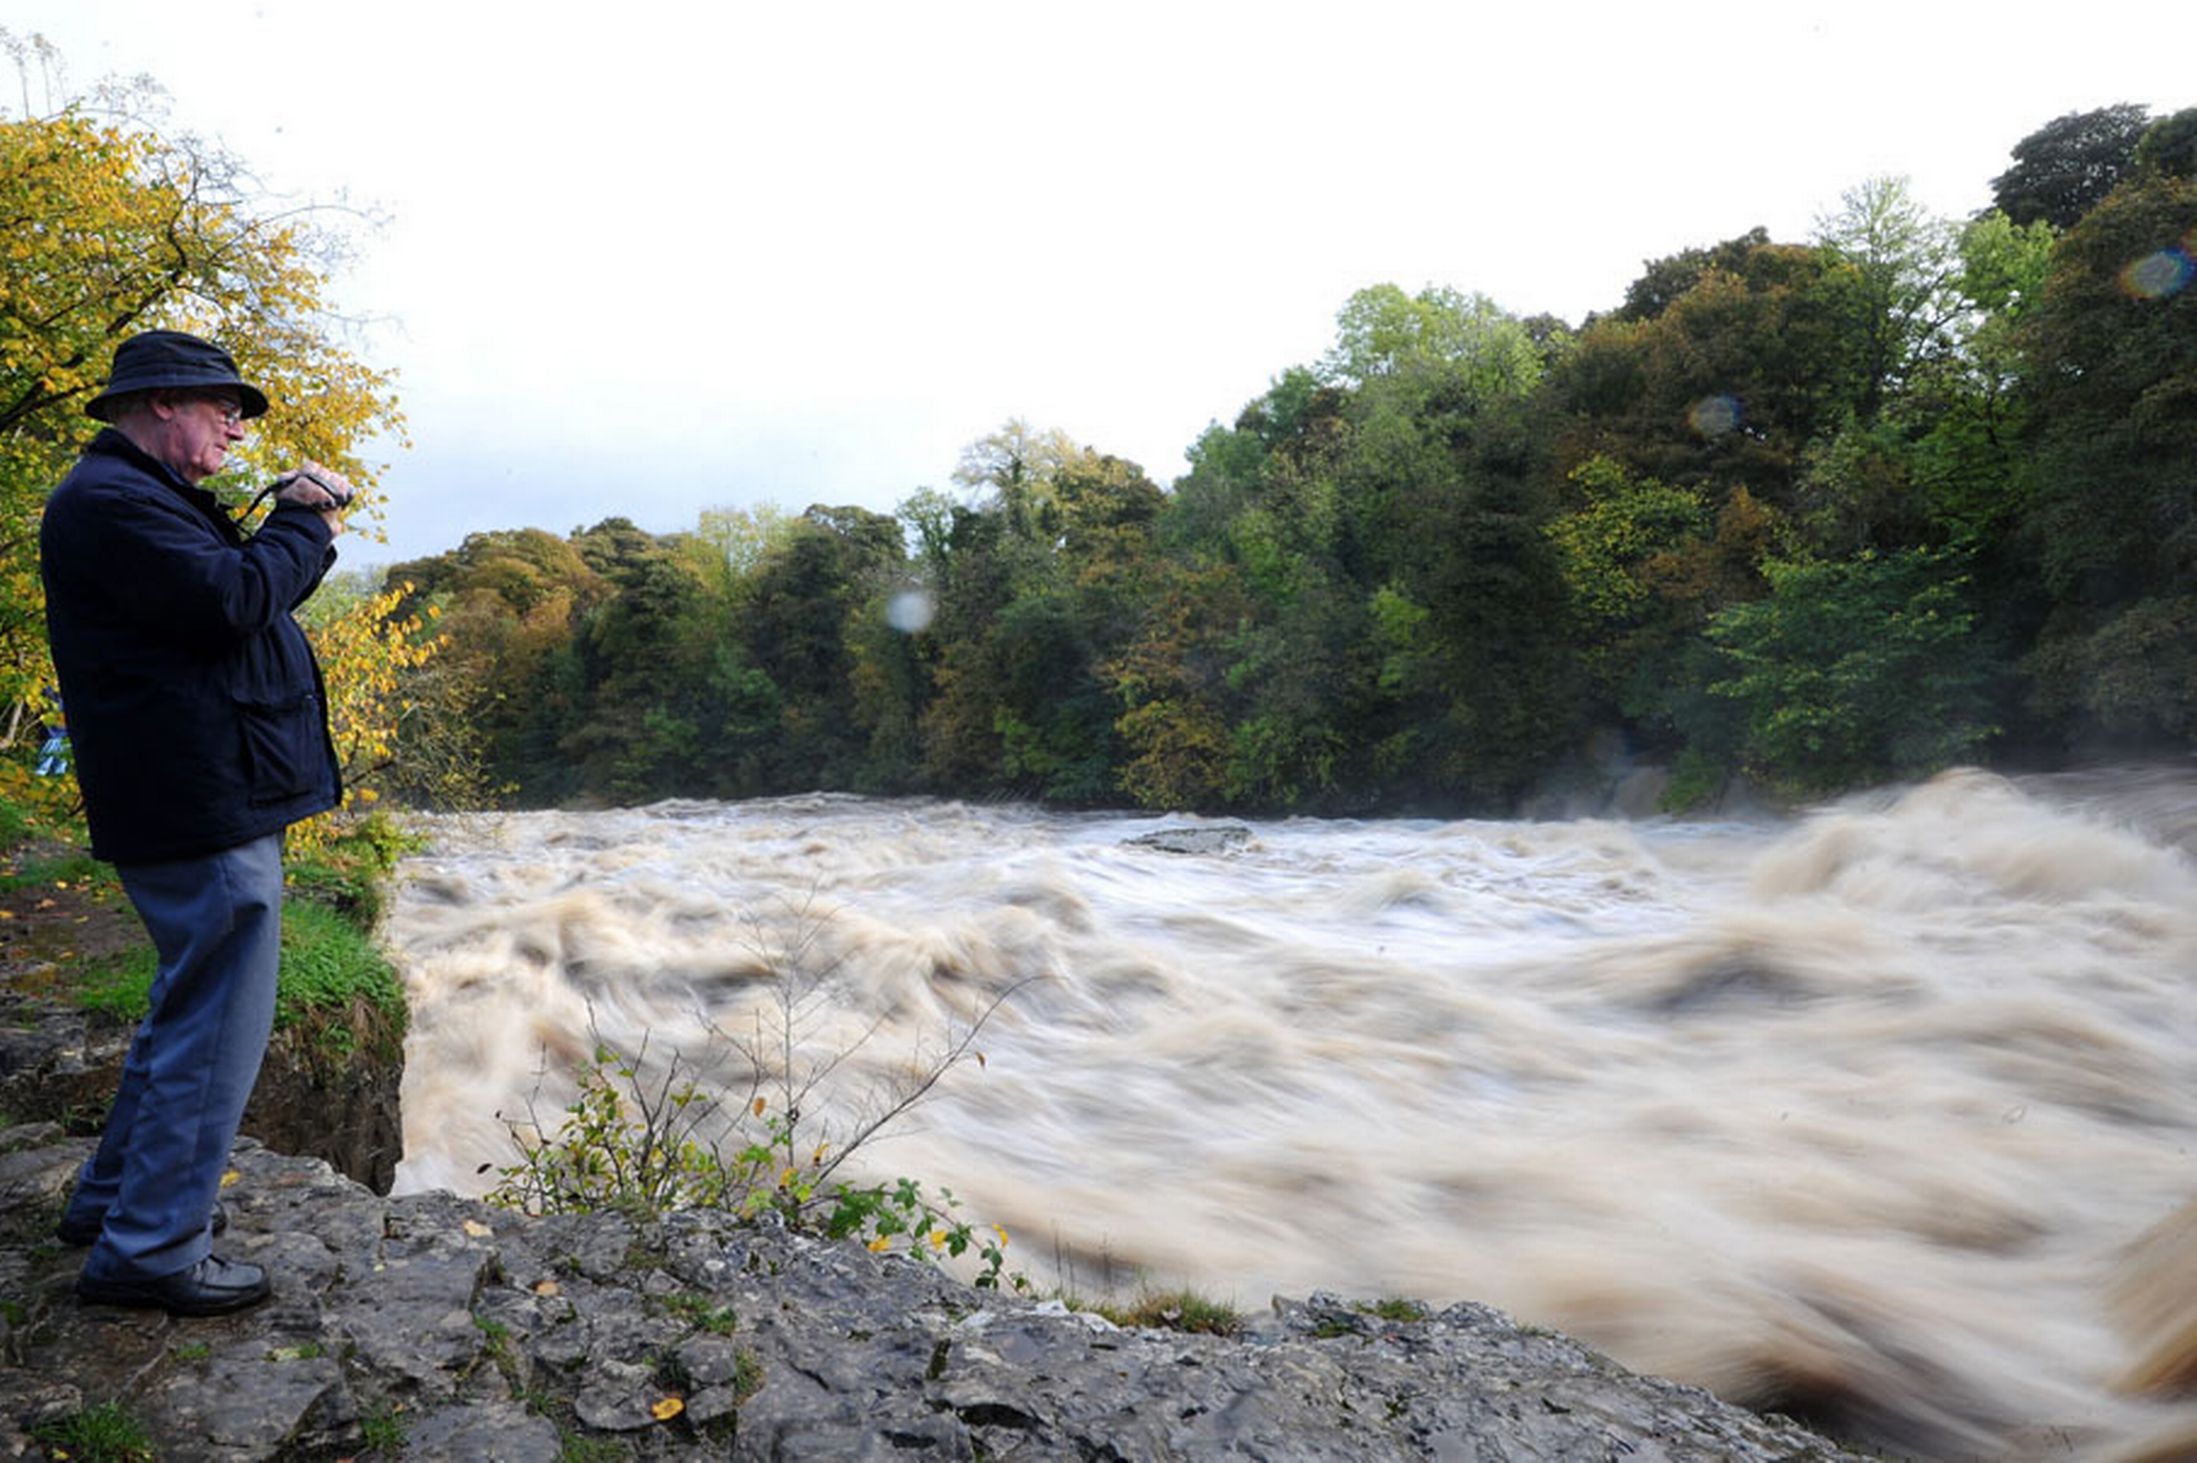 A-man-looks-out-over-the-fast-flowing-and-swollen-River-Ure-at-Aysgarth-Falls-North-Yorkshire-23rd-October-2641150